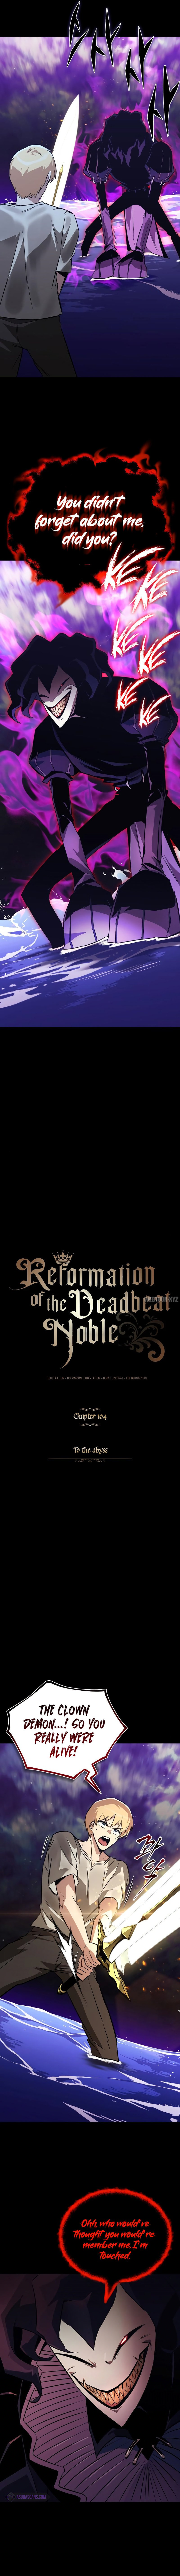 reformation-of-the-deadbeat-noble-chap-104-5